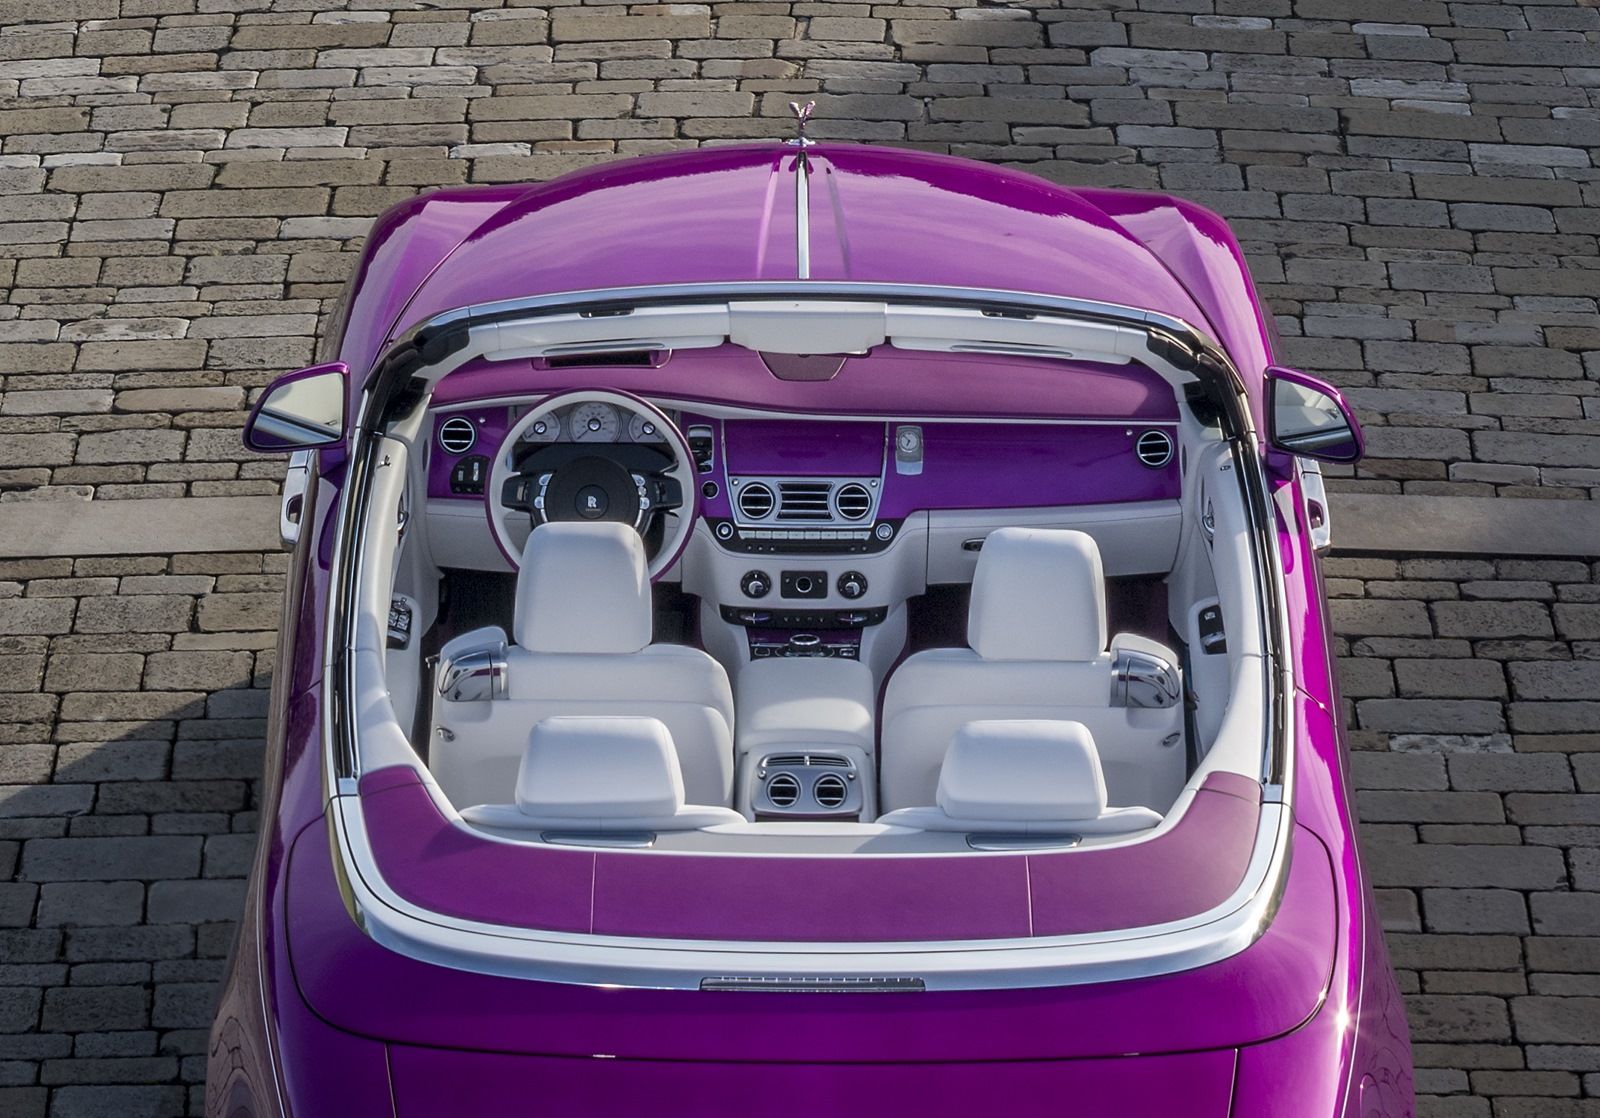 Unbelievably Bespoke: Rolls-Royce rolls out a string of customised cars